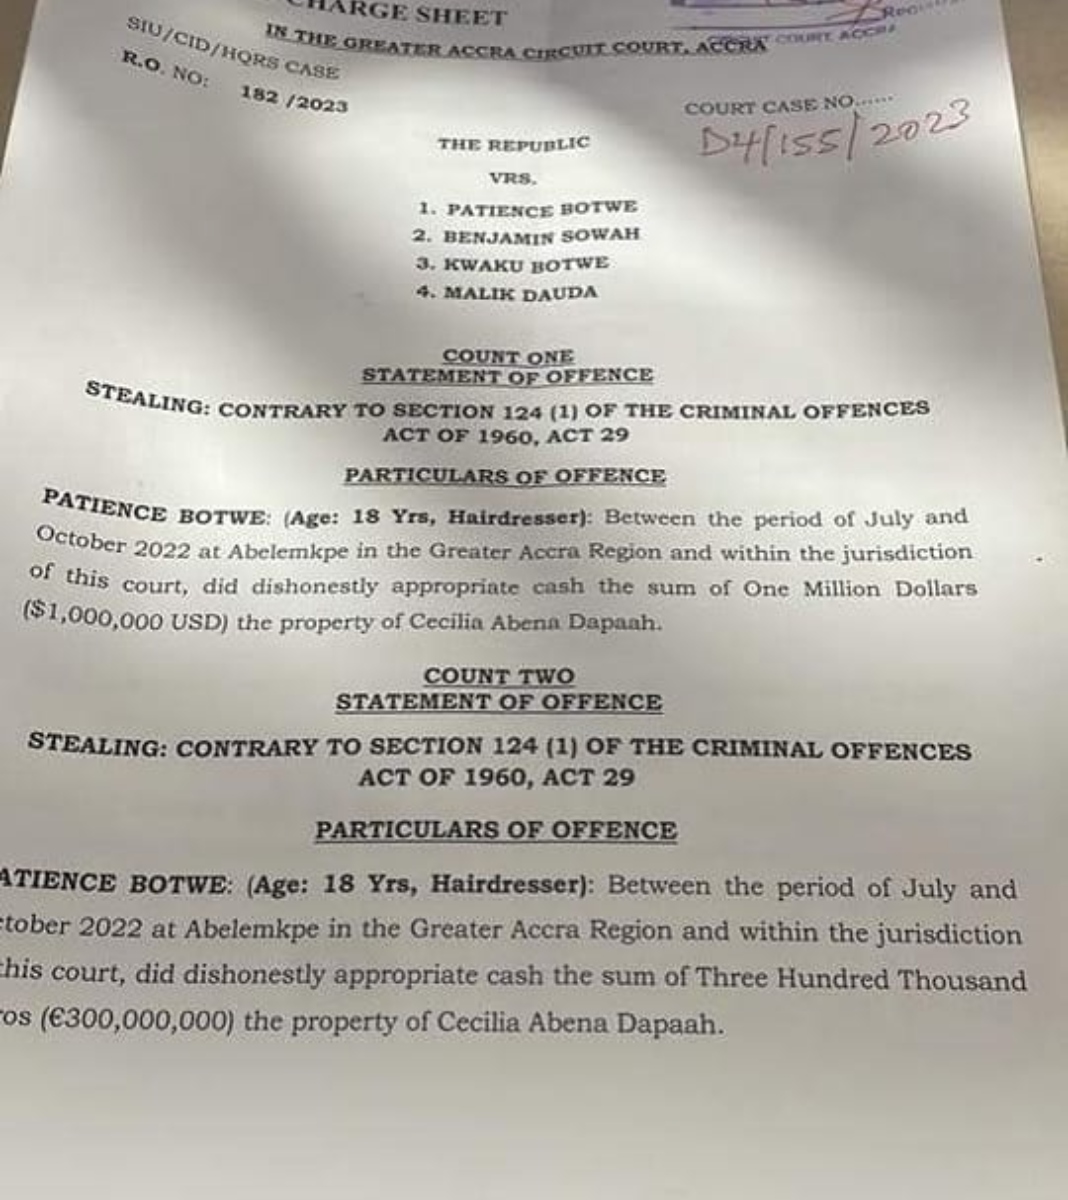 Cecilia Dapaah's charge sheet shows she lost a huge amount of money to her house help.